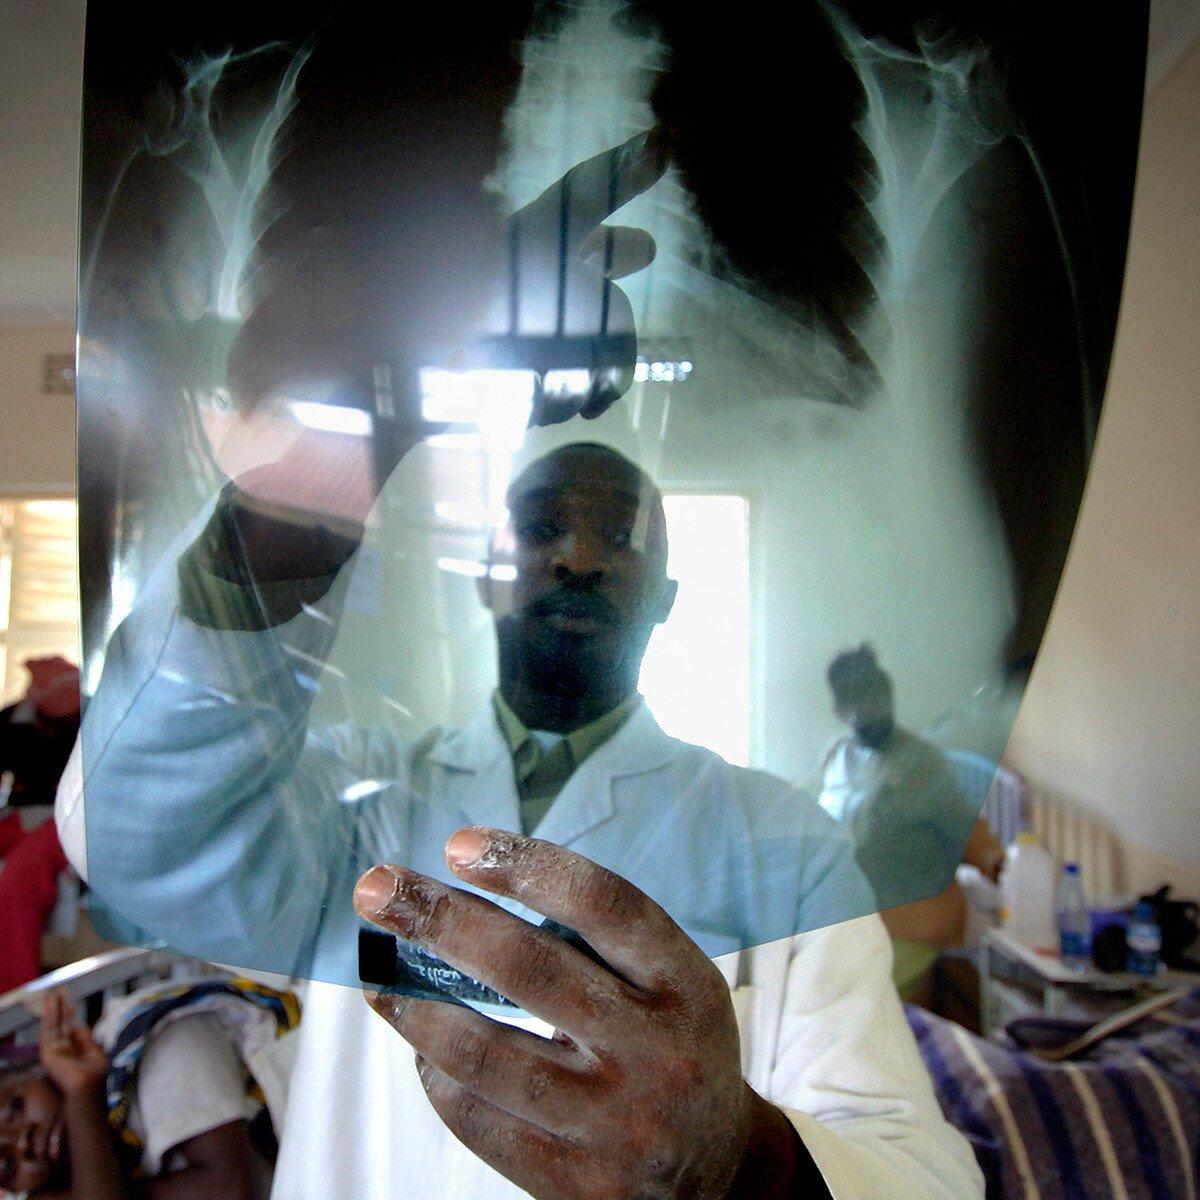 A doctor examines the x-ray of the chest of a patient with TB